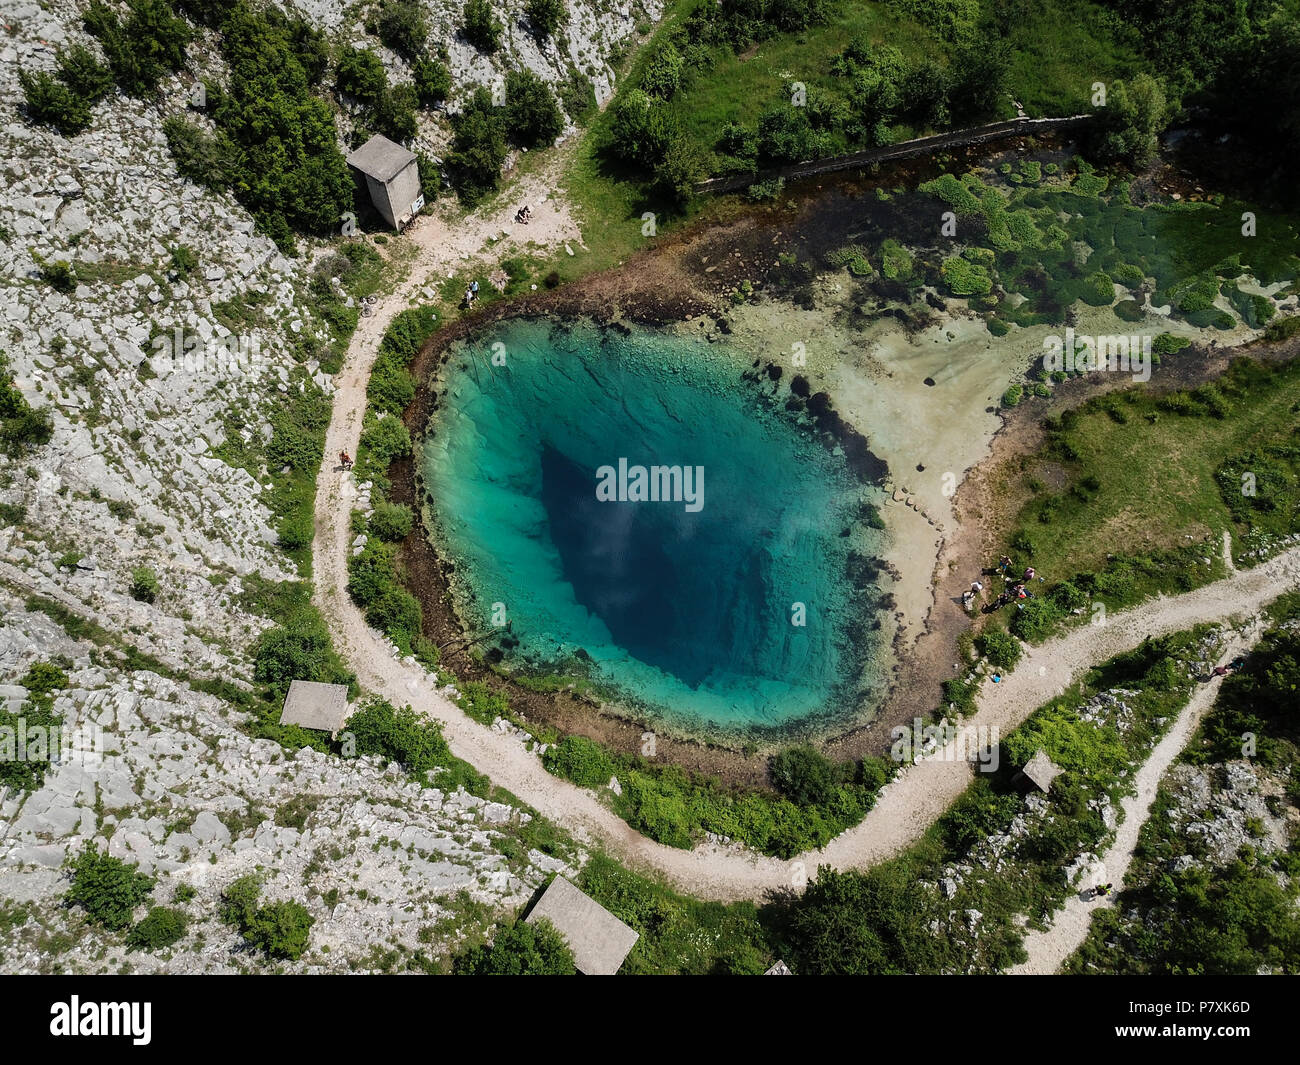 The spring of the Cetina River (izvor Cetine) in the foothills of the Dinara Mountain is named Blue Eye (Modro oko). Stock Photo